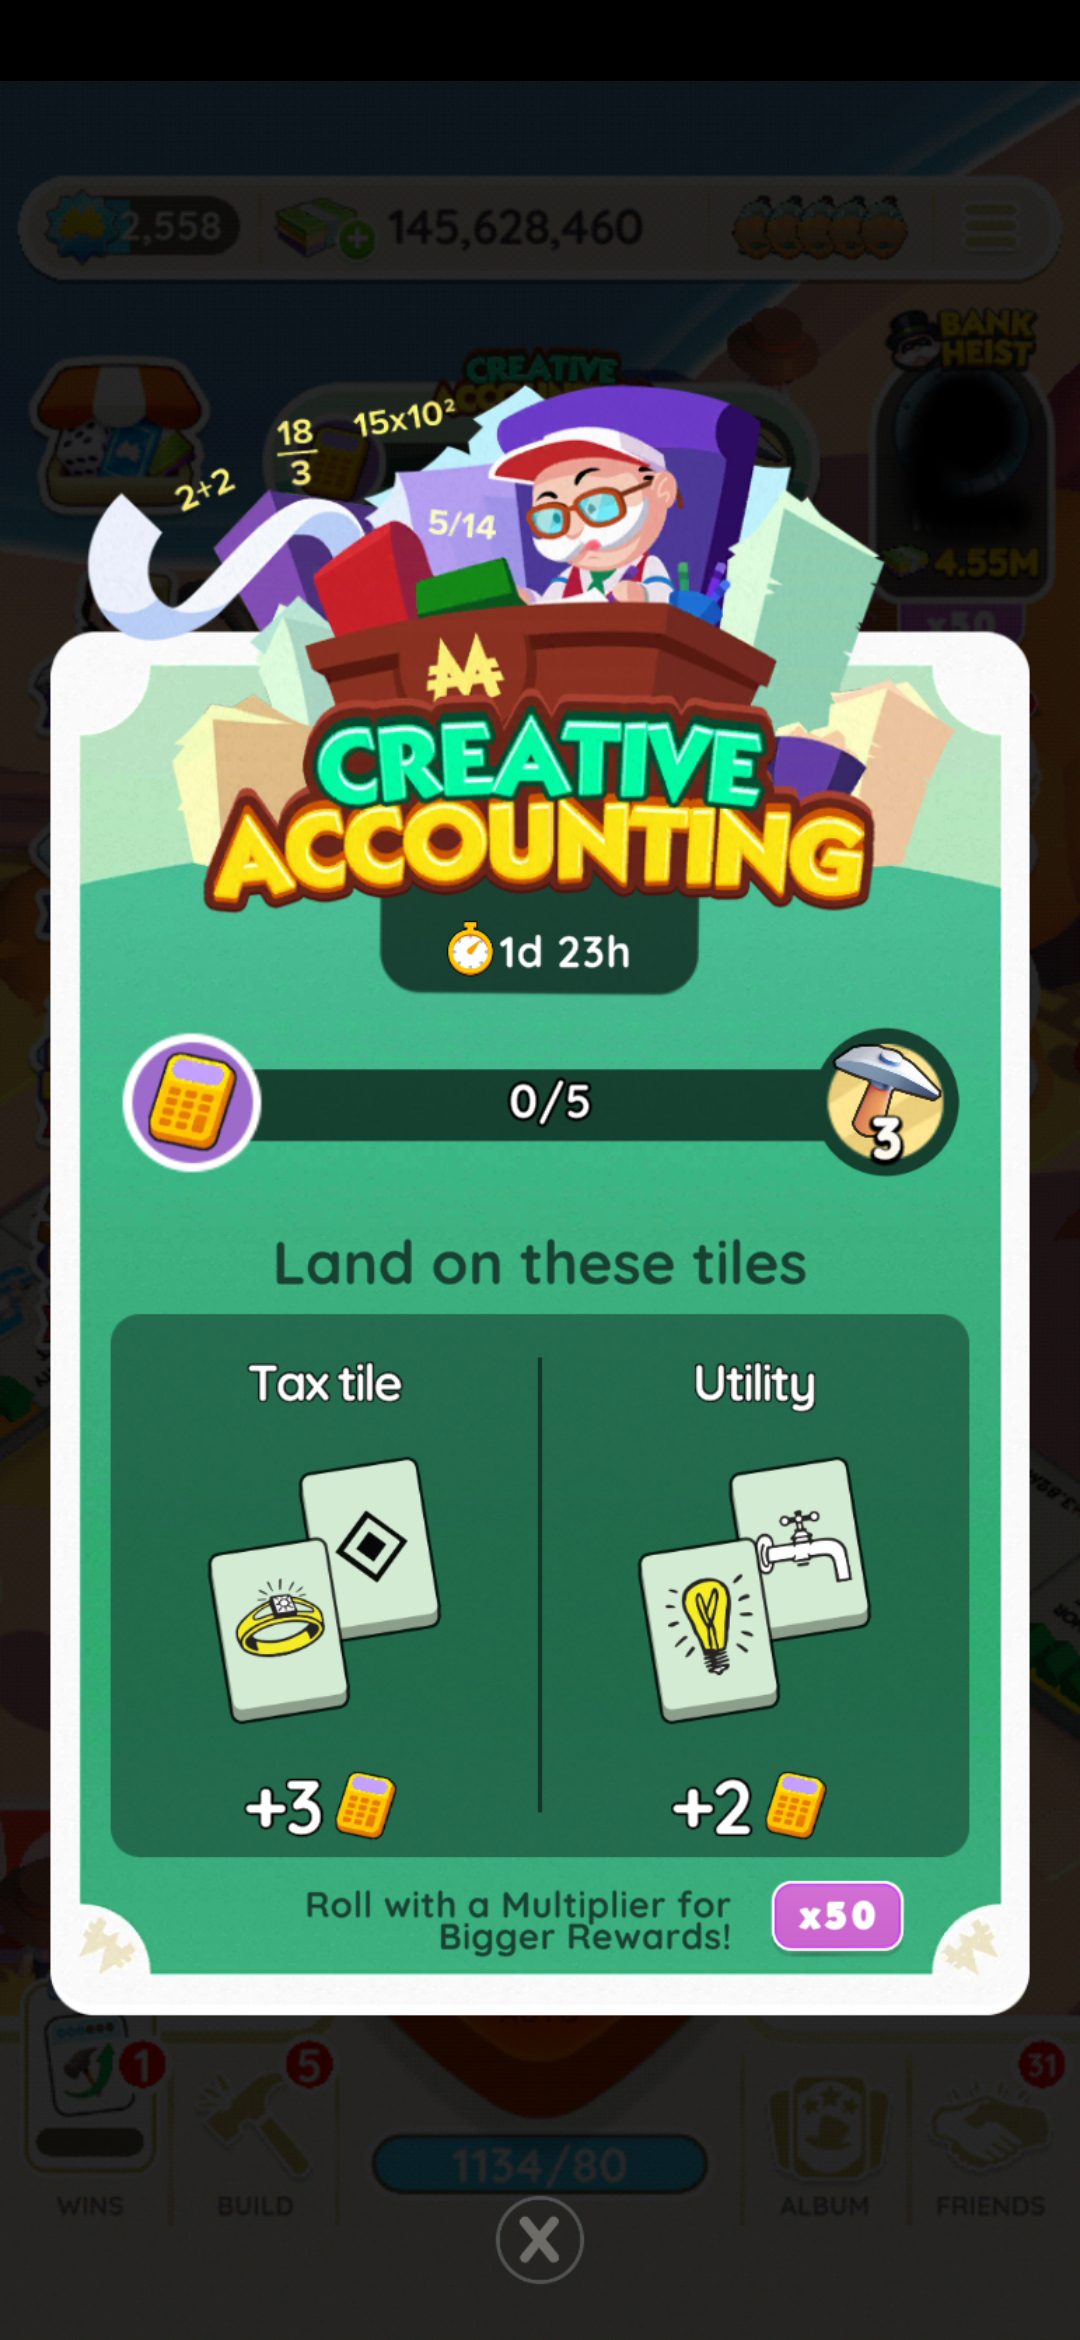 An image from the Creative Accounting event in Monopoly GO showing Rich Uncle Pennybags sitting at a desk and doing math while numbers and equations float around his head as part of a list on all the rewards, milestones, and prizes one can get for the event and how to play it and win it.